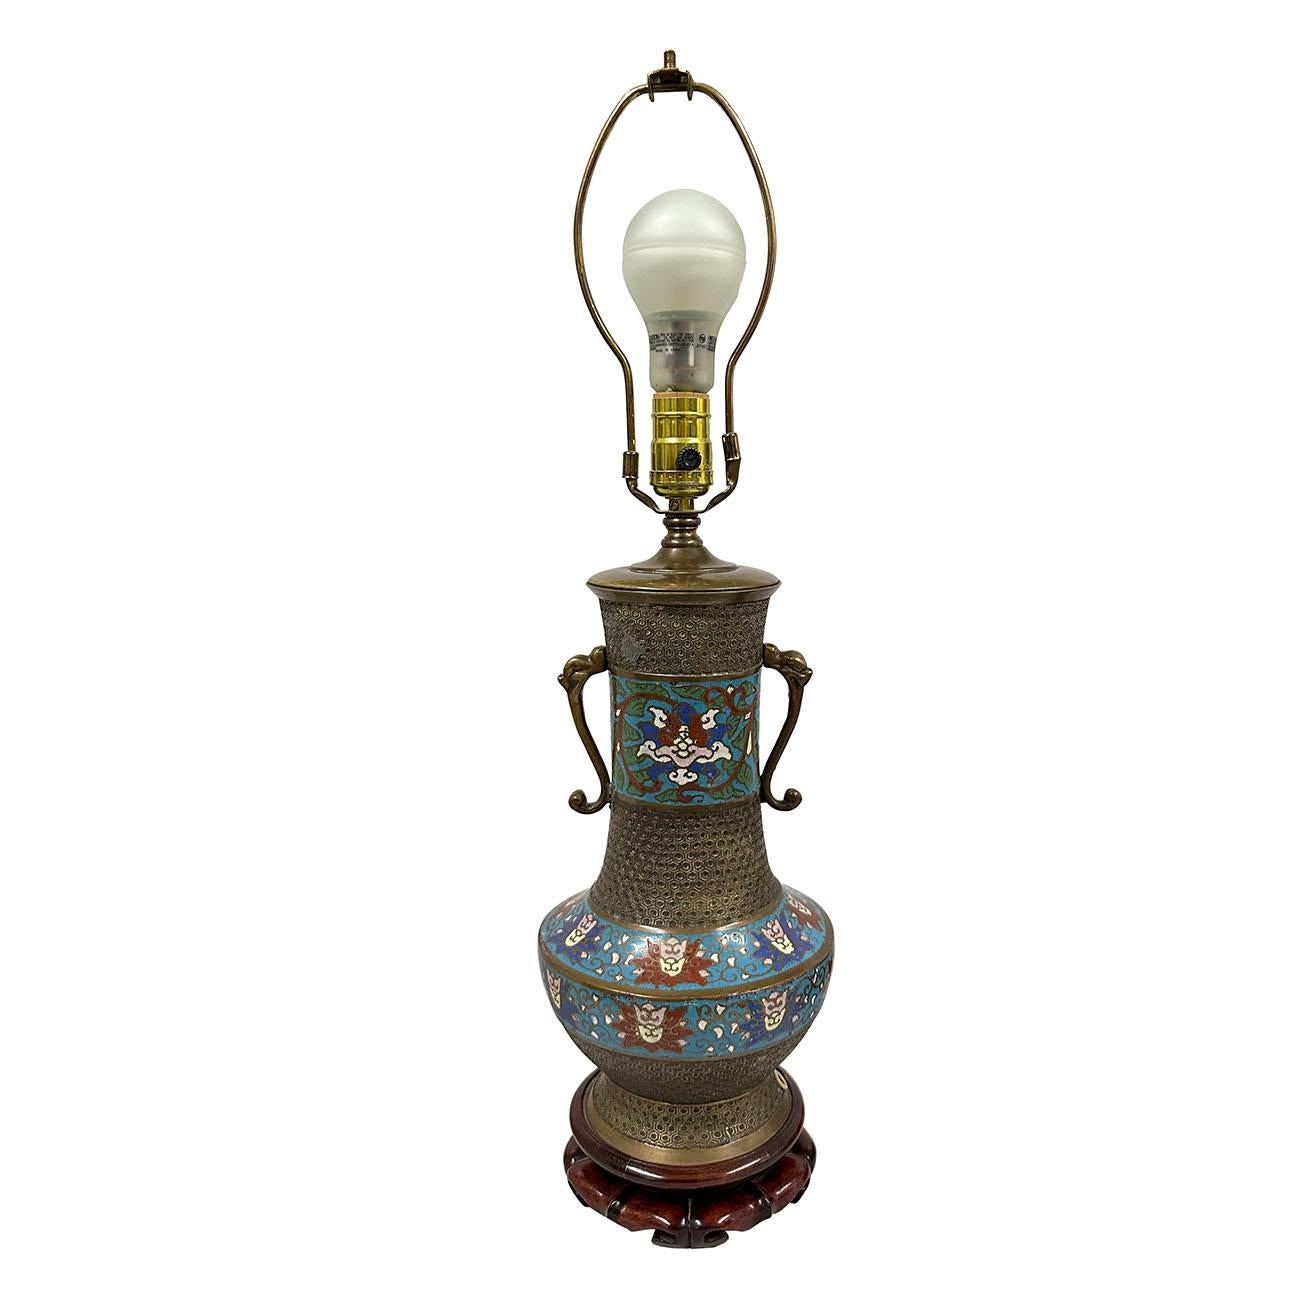 Antique Japanese Cloisonné Lamp, circa 1910, with blue, red and green enamel inlay on brass baluster shaped vase, mounted as a table lamp and electrified; All hand made cloisonne on the gold brass base with traditional decoration patterns. It is In